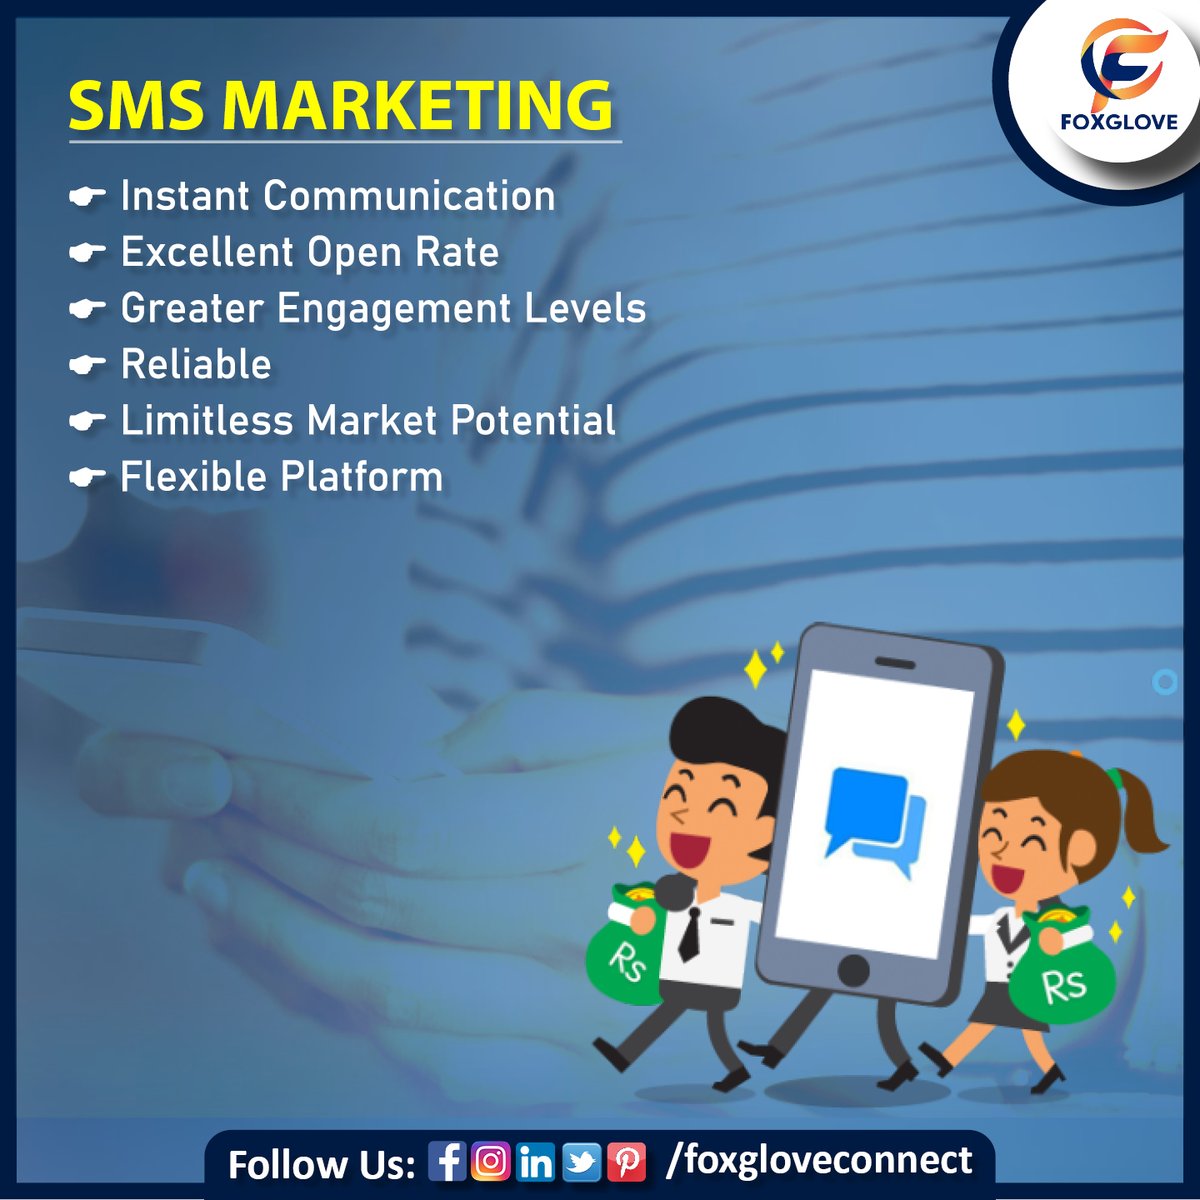 Boost your business growth prospects with Bulk SMS marketing. Engage your customers by sending SMS with regular offers, promo codes etc.
Regards: @FoxgloveConnect 
#FoxgloveConnect #BulkSMS #EnterpriseMessaging #BulkMessaging #DigitalMarketing #InternetMarketing #SEO #SMO #SMS